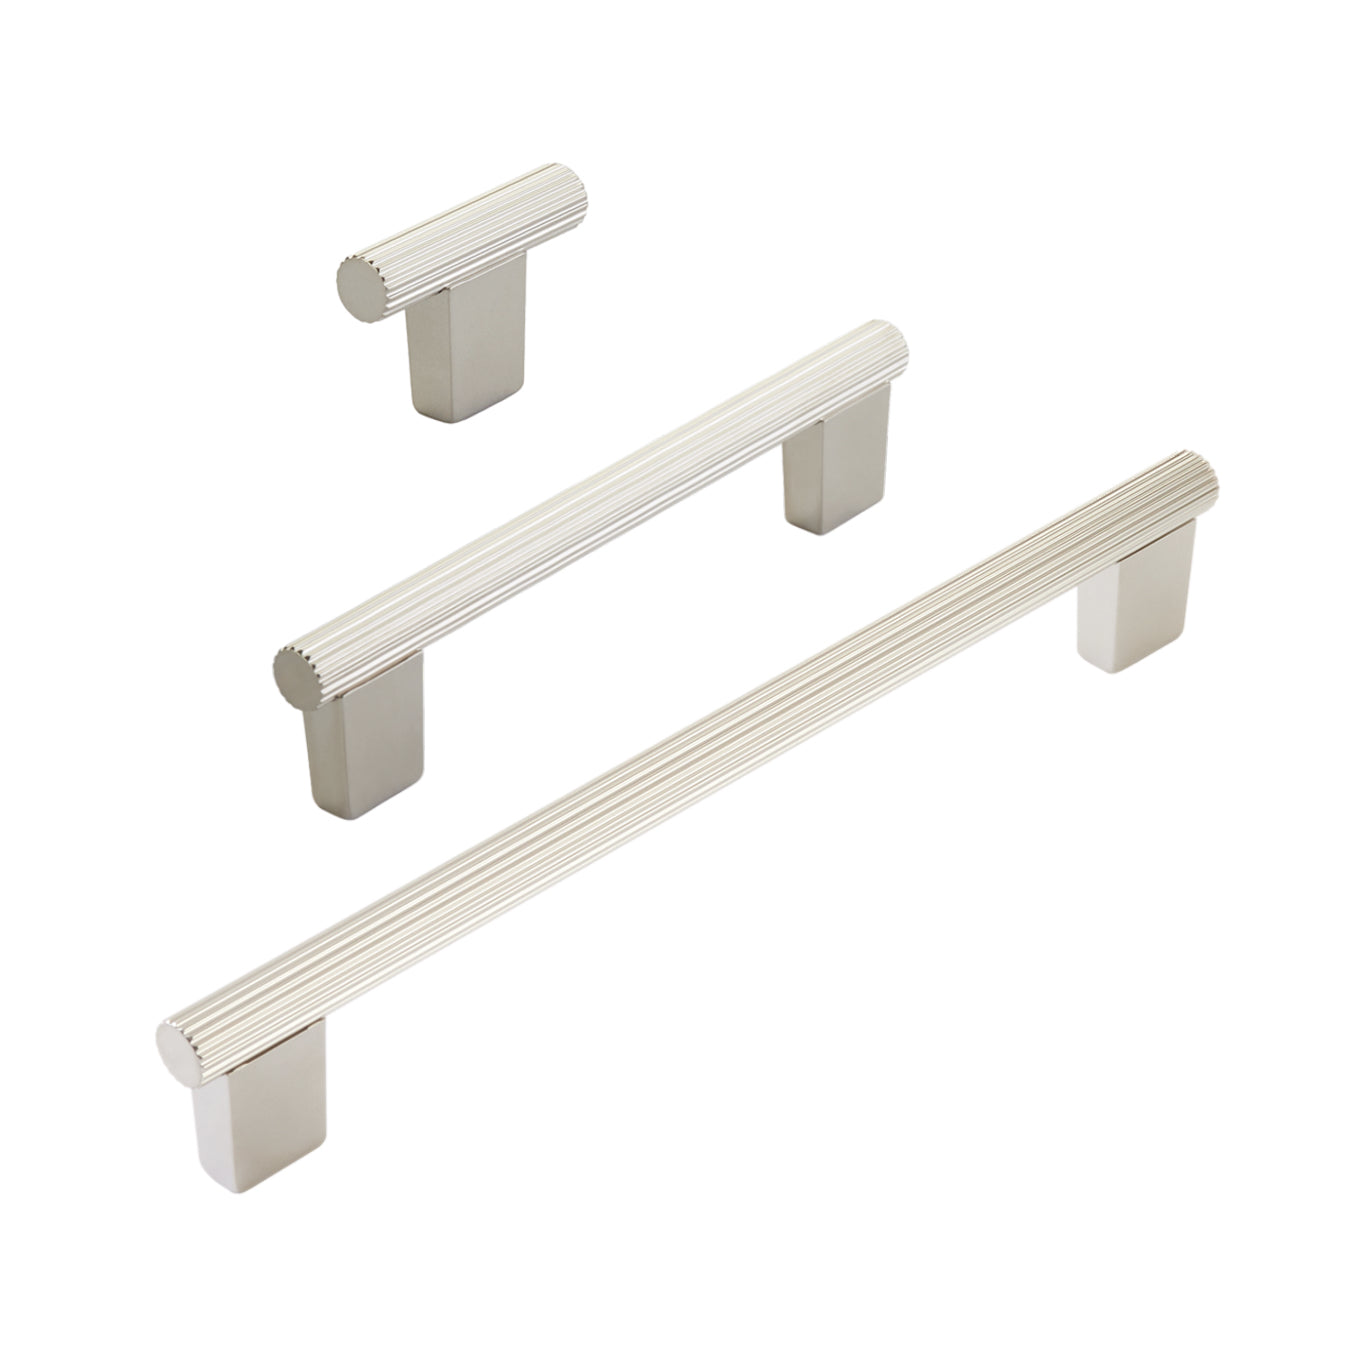 Brushed Nickel "Knox" Cabinet Knobs and Drawer Pulls